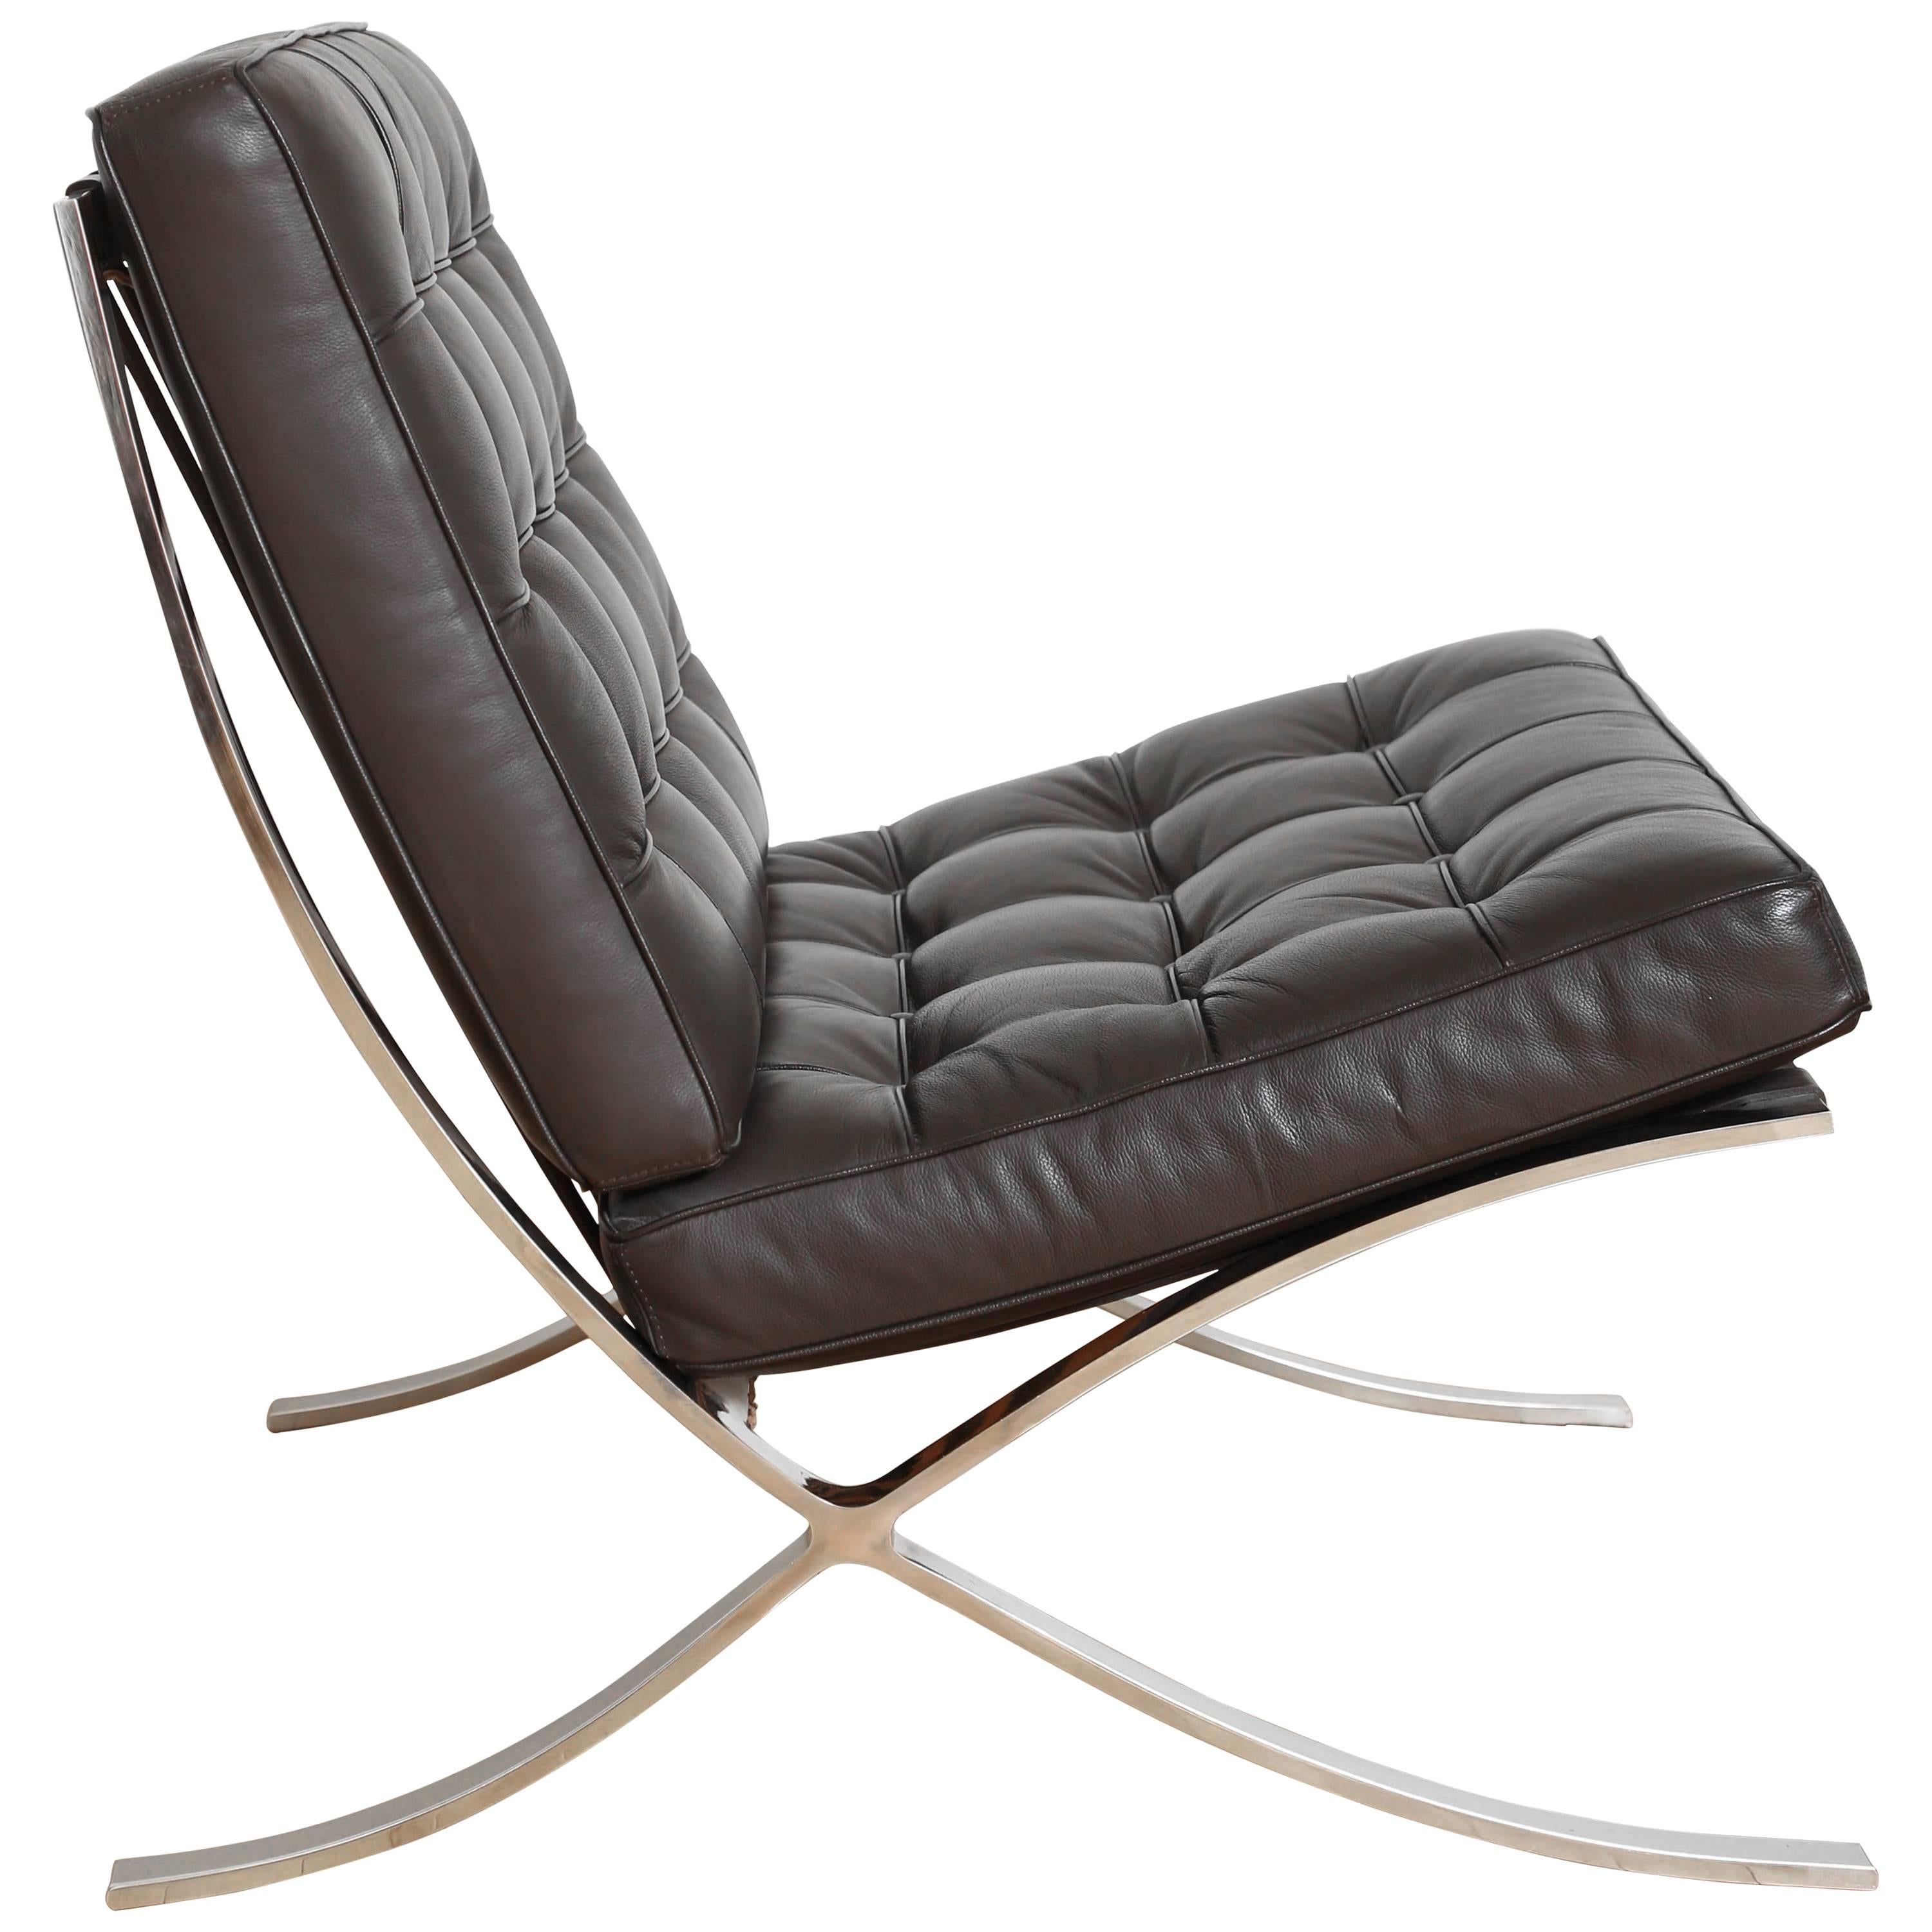 Vintage Barcelona lounge chair in espresso brown leather. Iconic design originally manufactured during the Bauhaus Movement, circa 1929. The chair has a slight recline, and features leather slats along the back with tufted seat cushions. Suited for